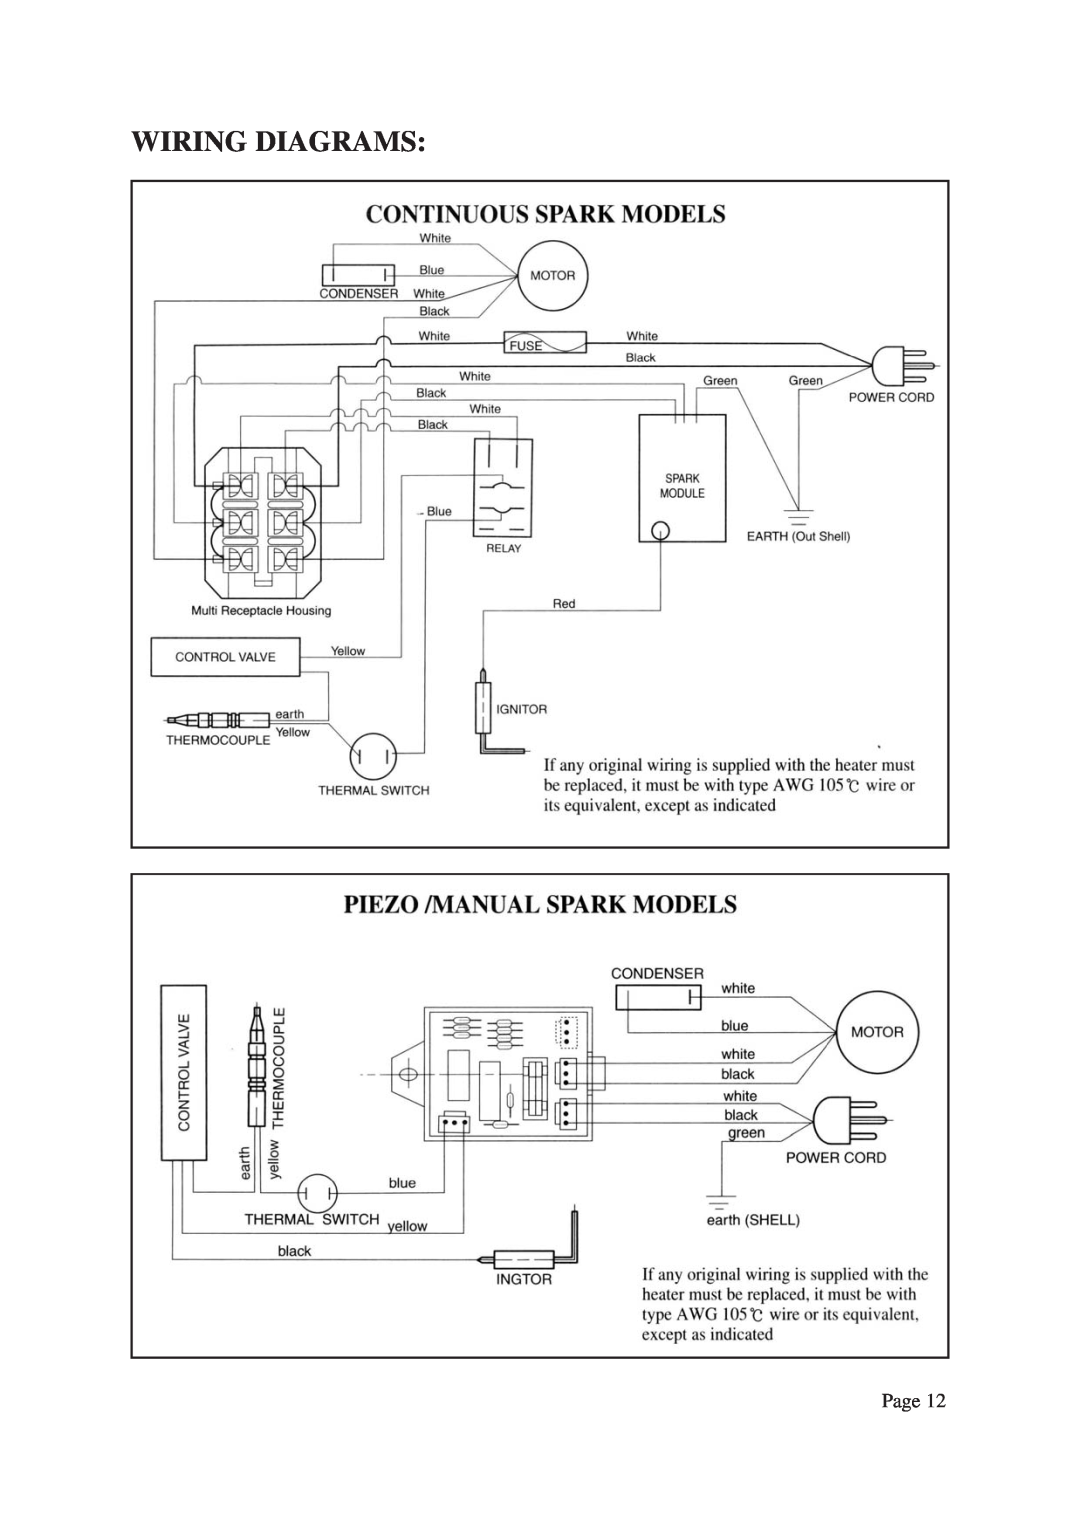 Vermont Casting ANSI Z83.7-2000, CSA 2.14-2000 instruction manual Wiring Diagrams, Page 